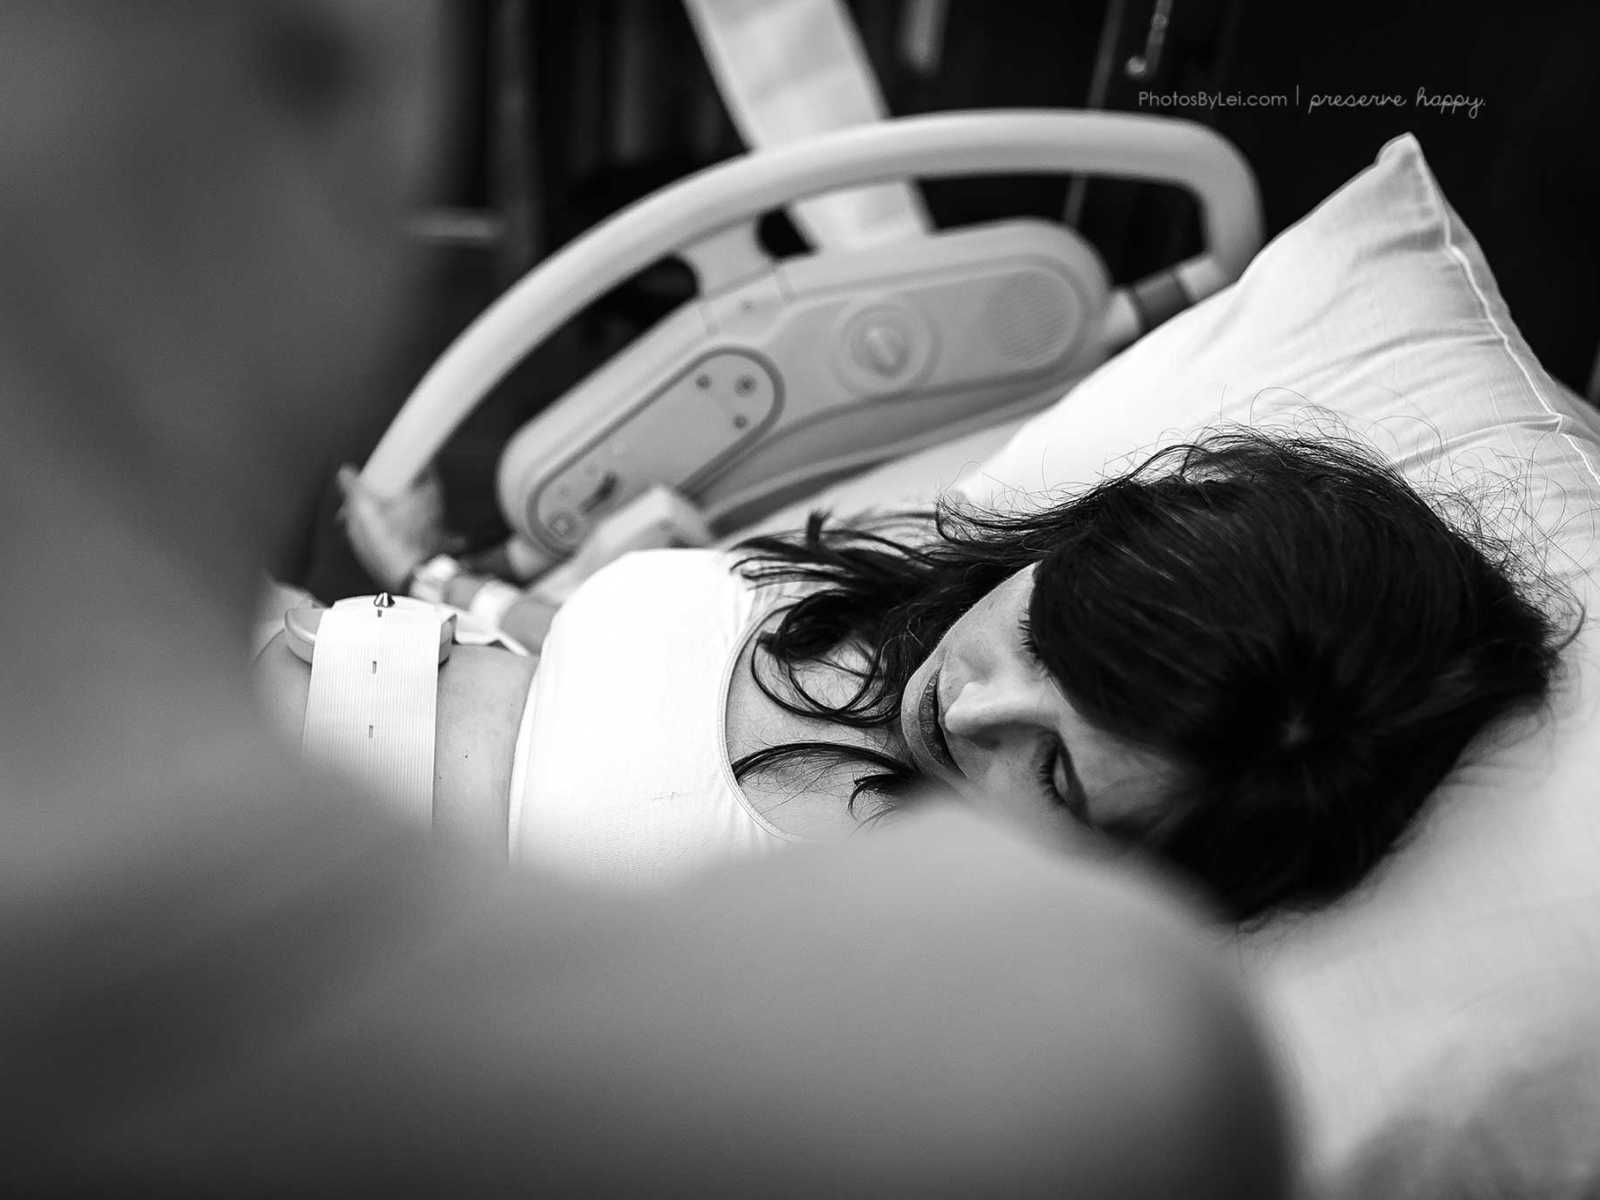 Pregnant woman with fetal monitor over stomach rests head on pillow in hospital bed